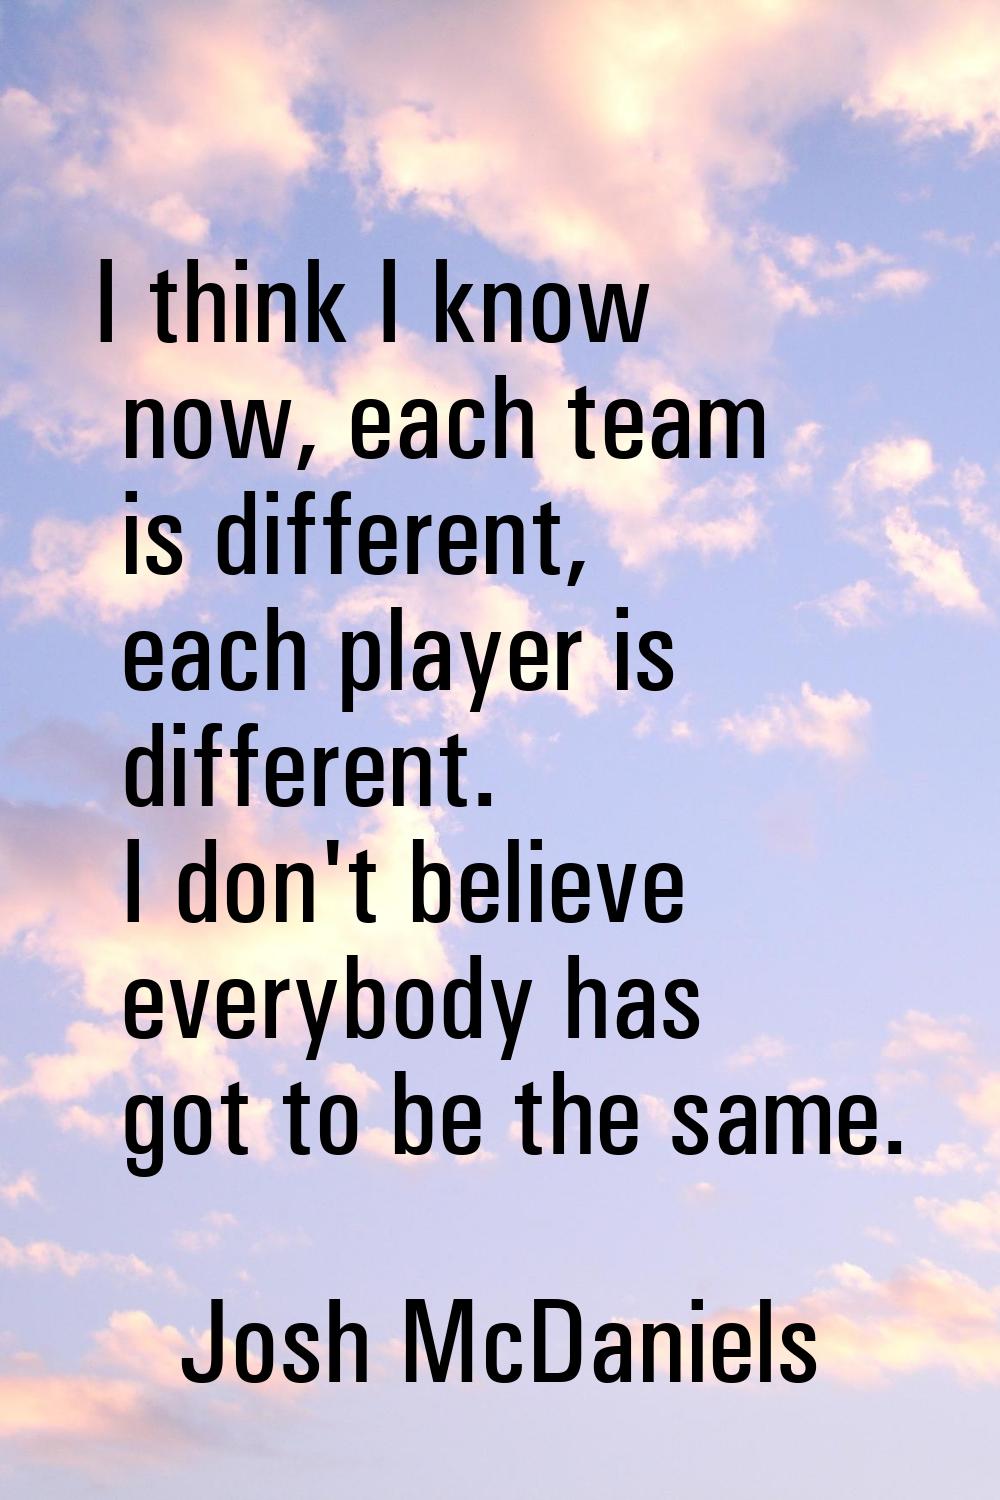 I think I know now, each team is different, each player is different. I don't believe everybody has